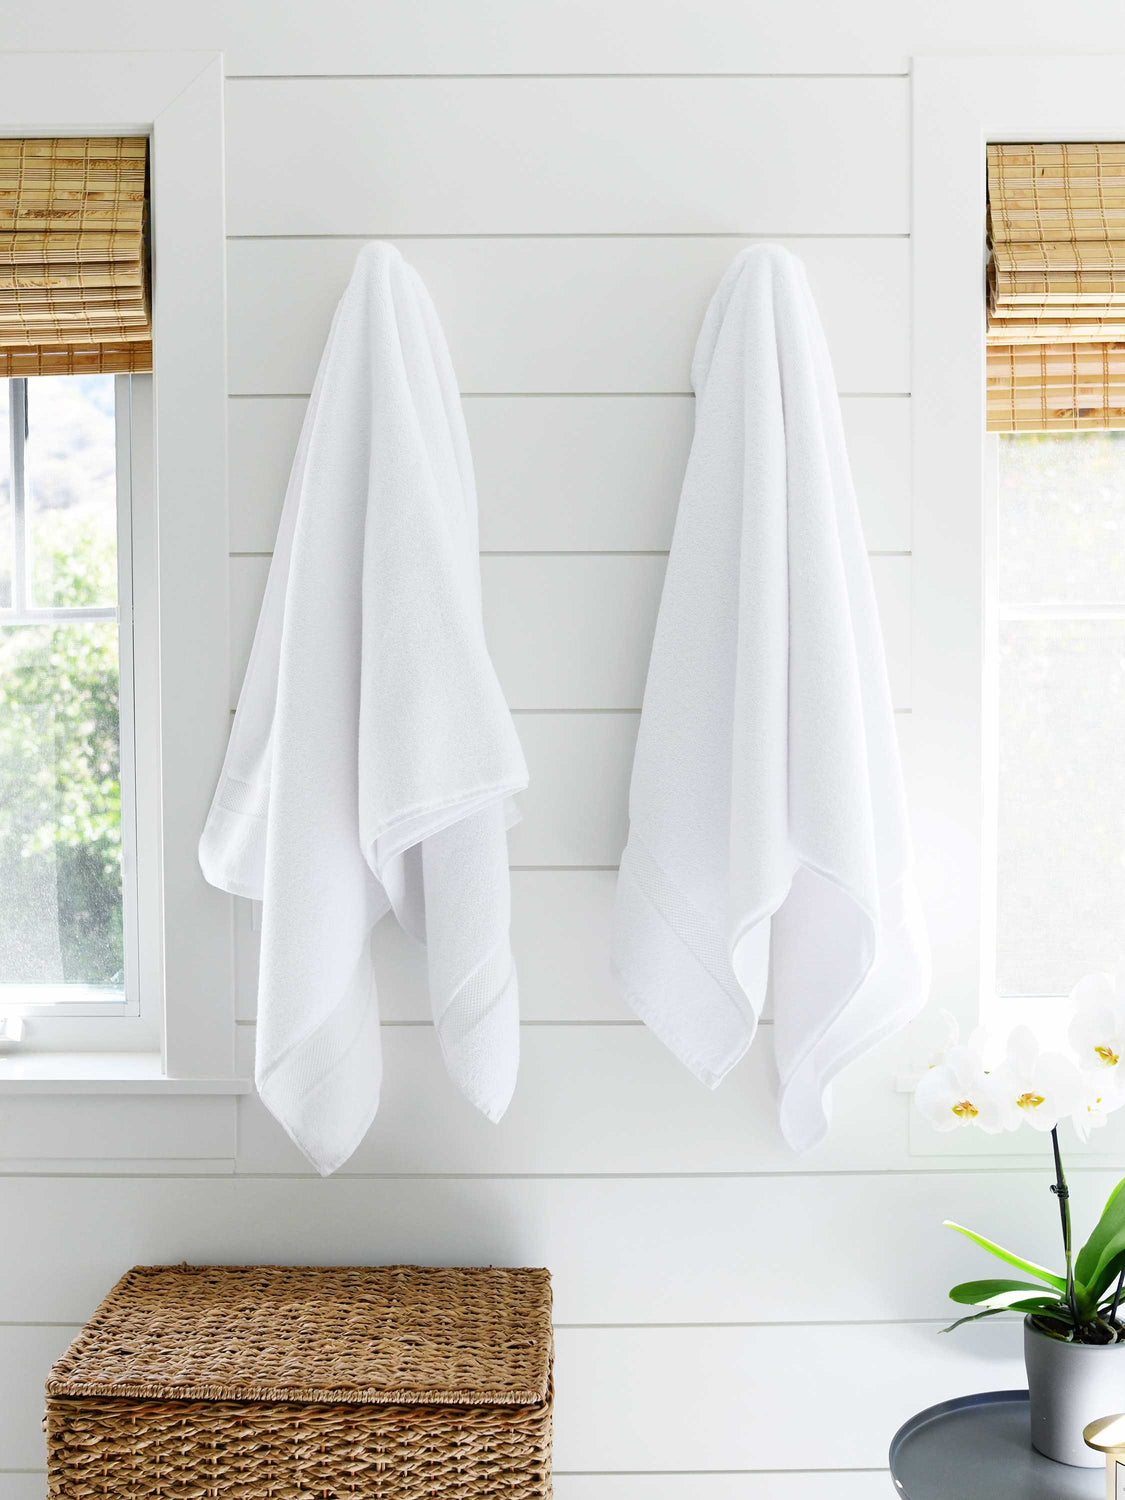 A pair of white cotton bath towels hanging on a wall side by side.